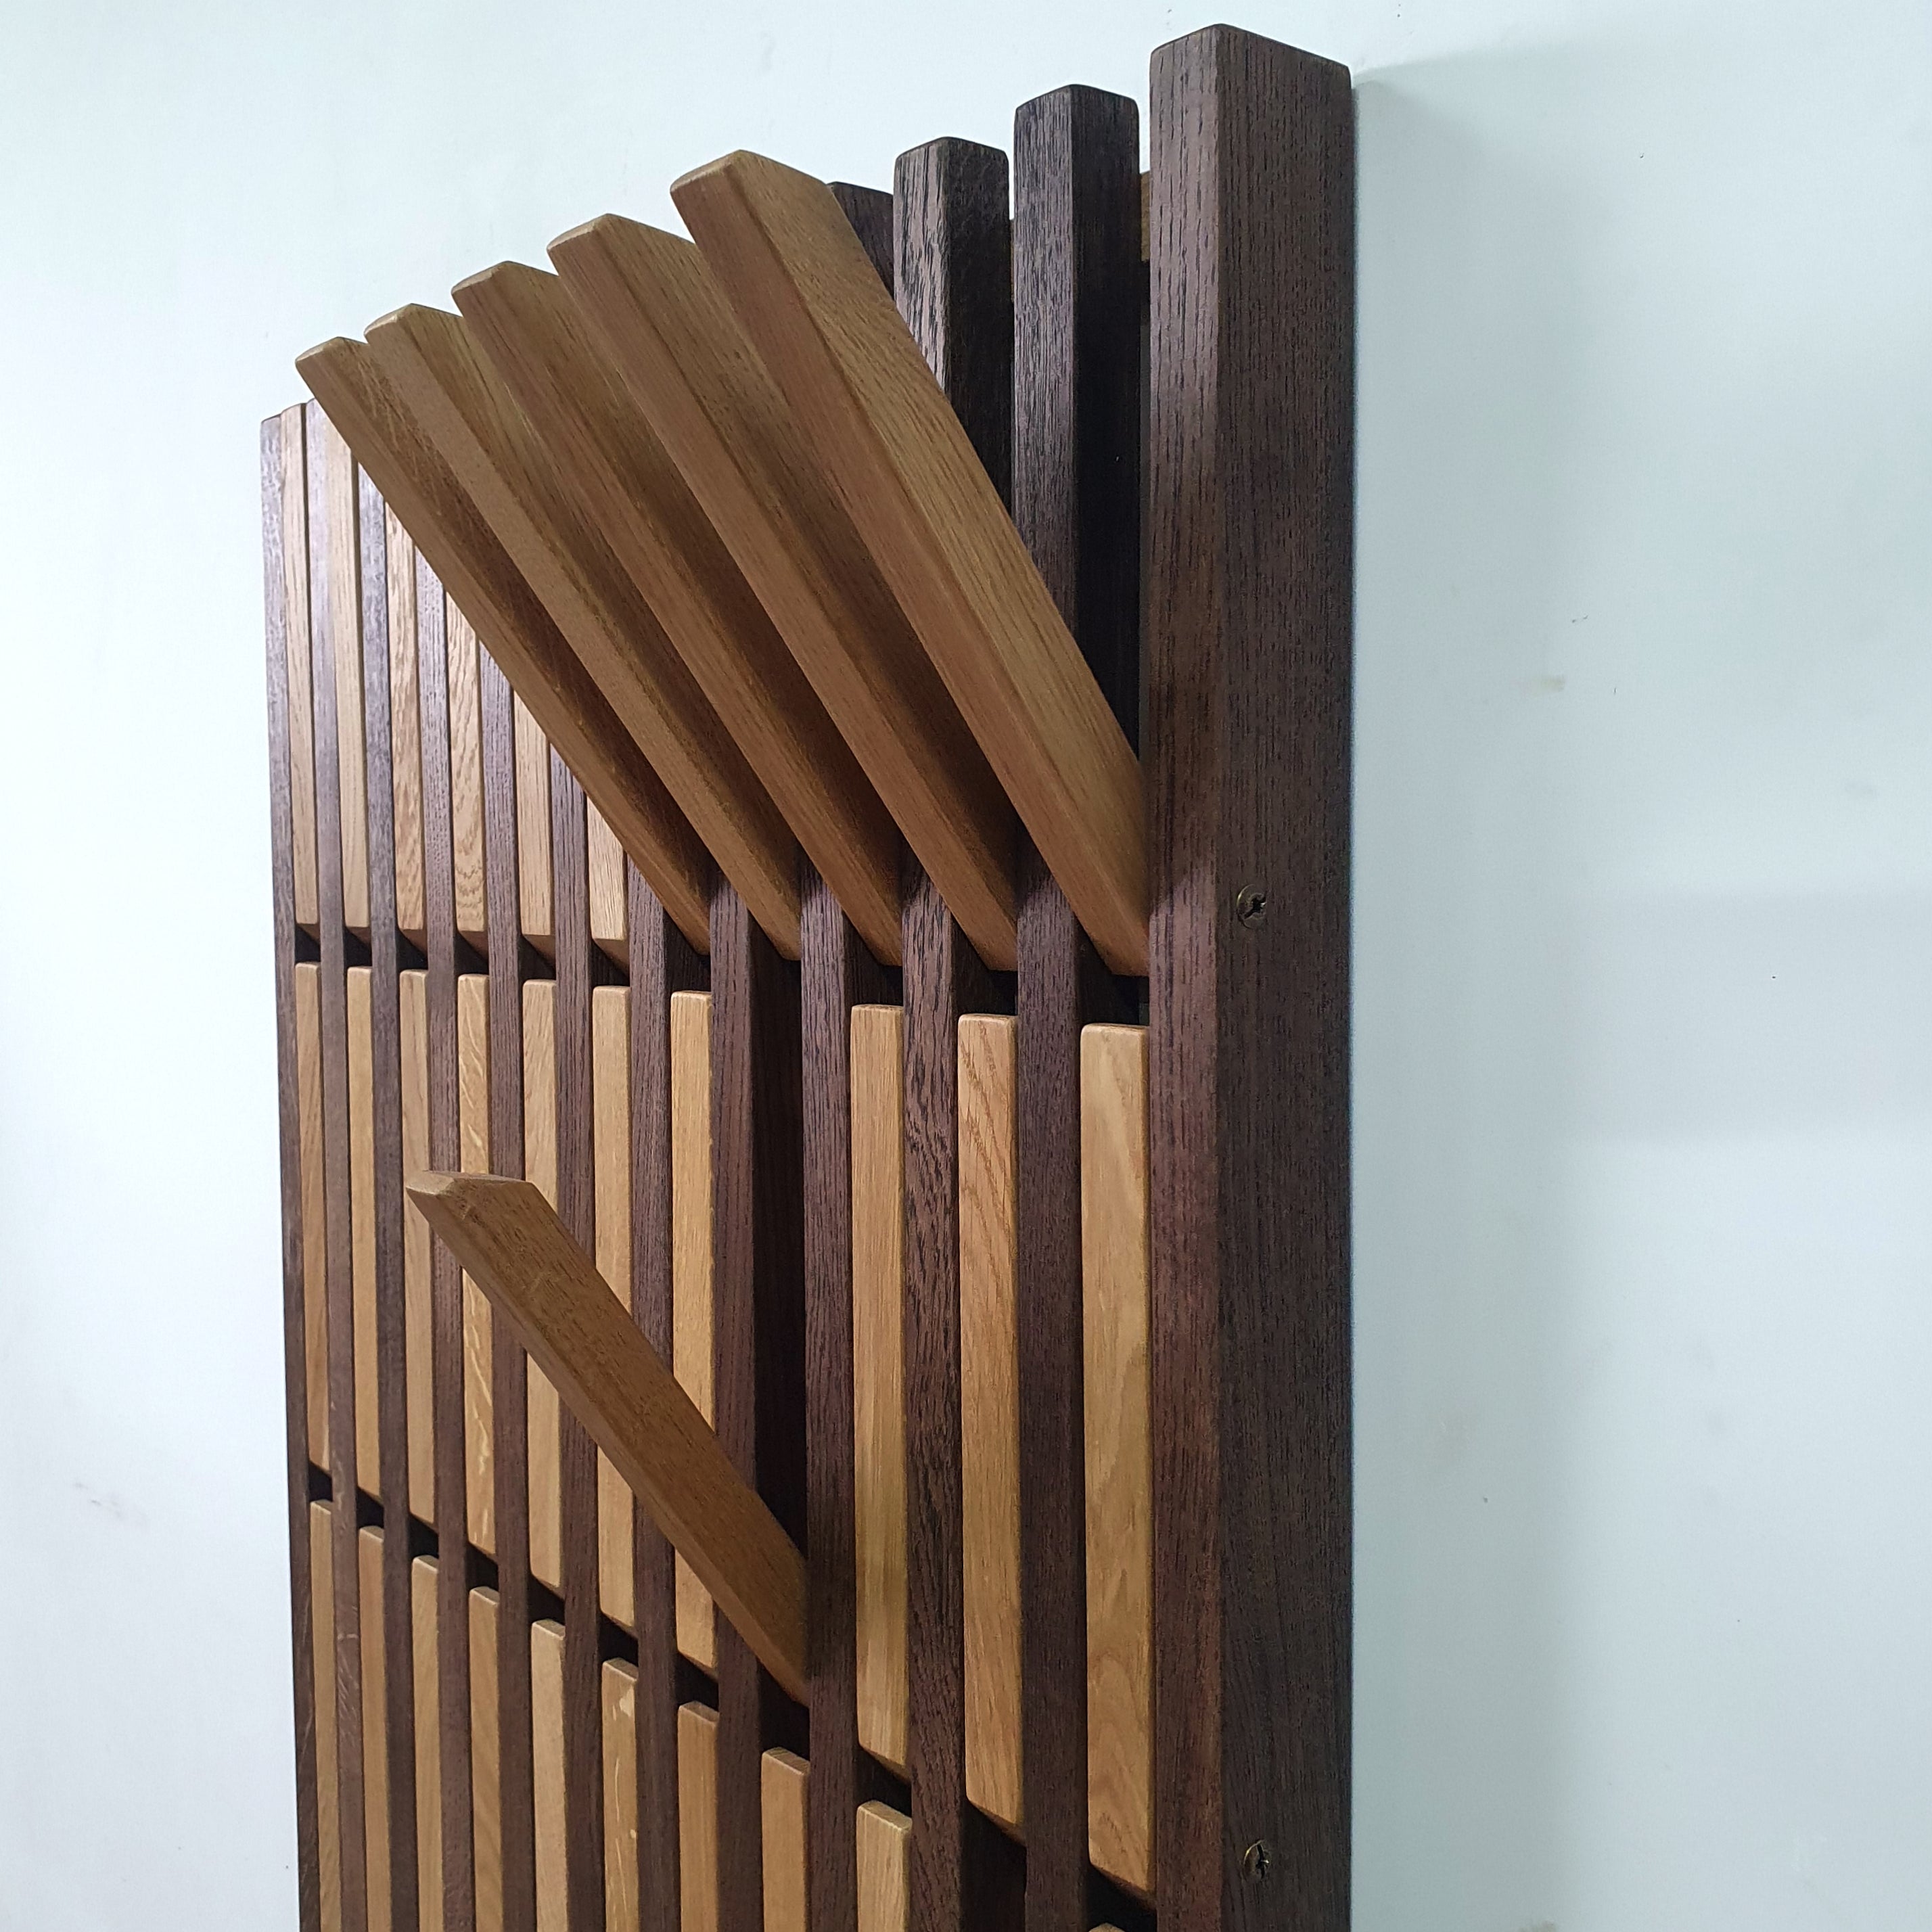 Wall Organizer -transformer for shoes and clothes. dark and natural oak